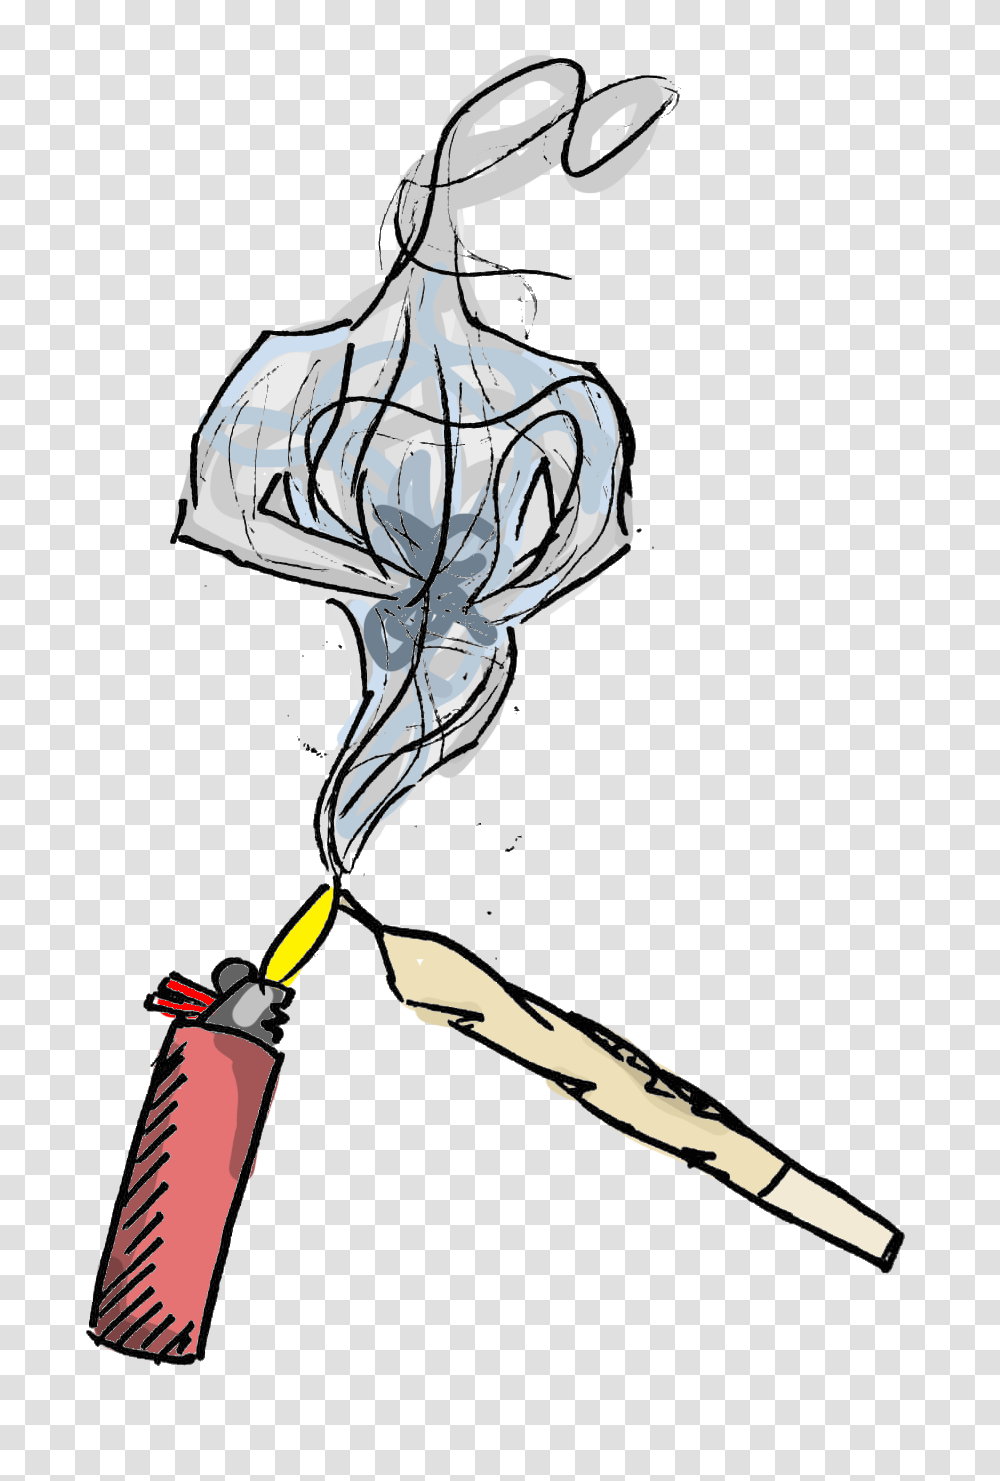 The Medicinal Wonders Of Weed Opinion, Weapon, Weaponry, Bomb, Dynamite Transparent Png